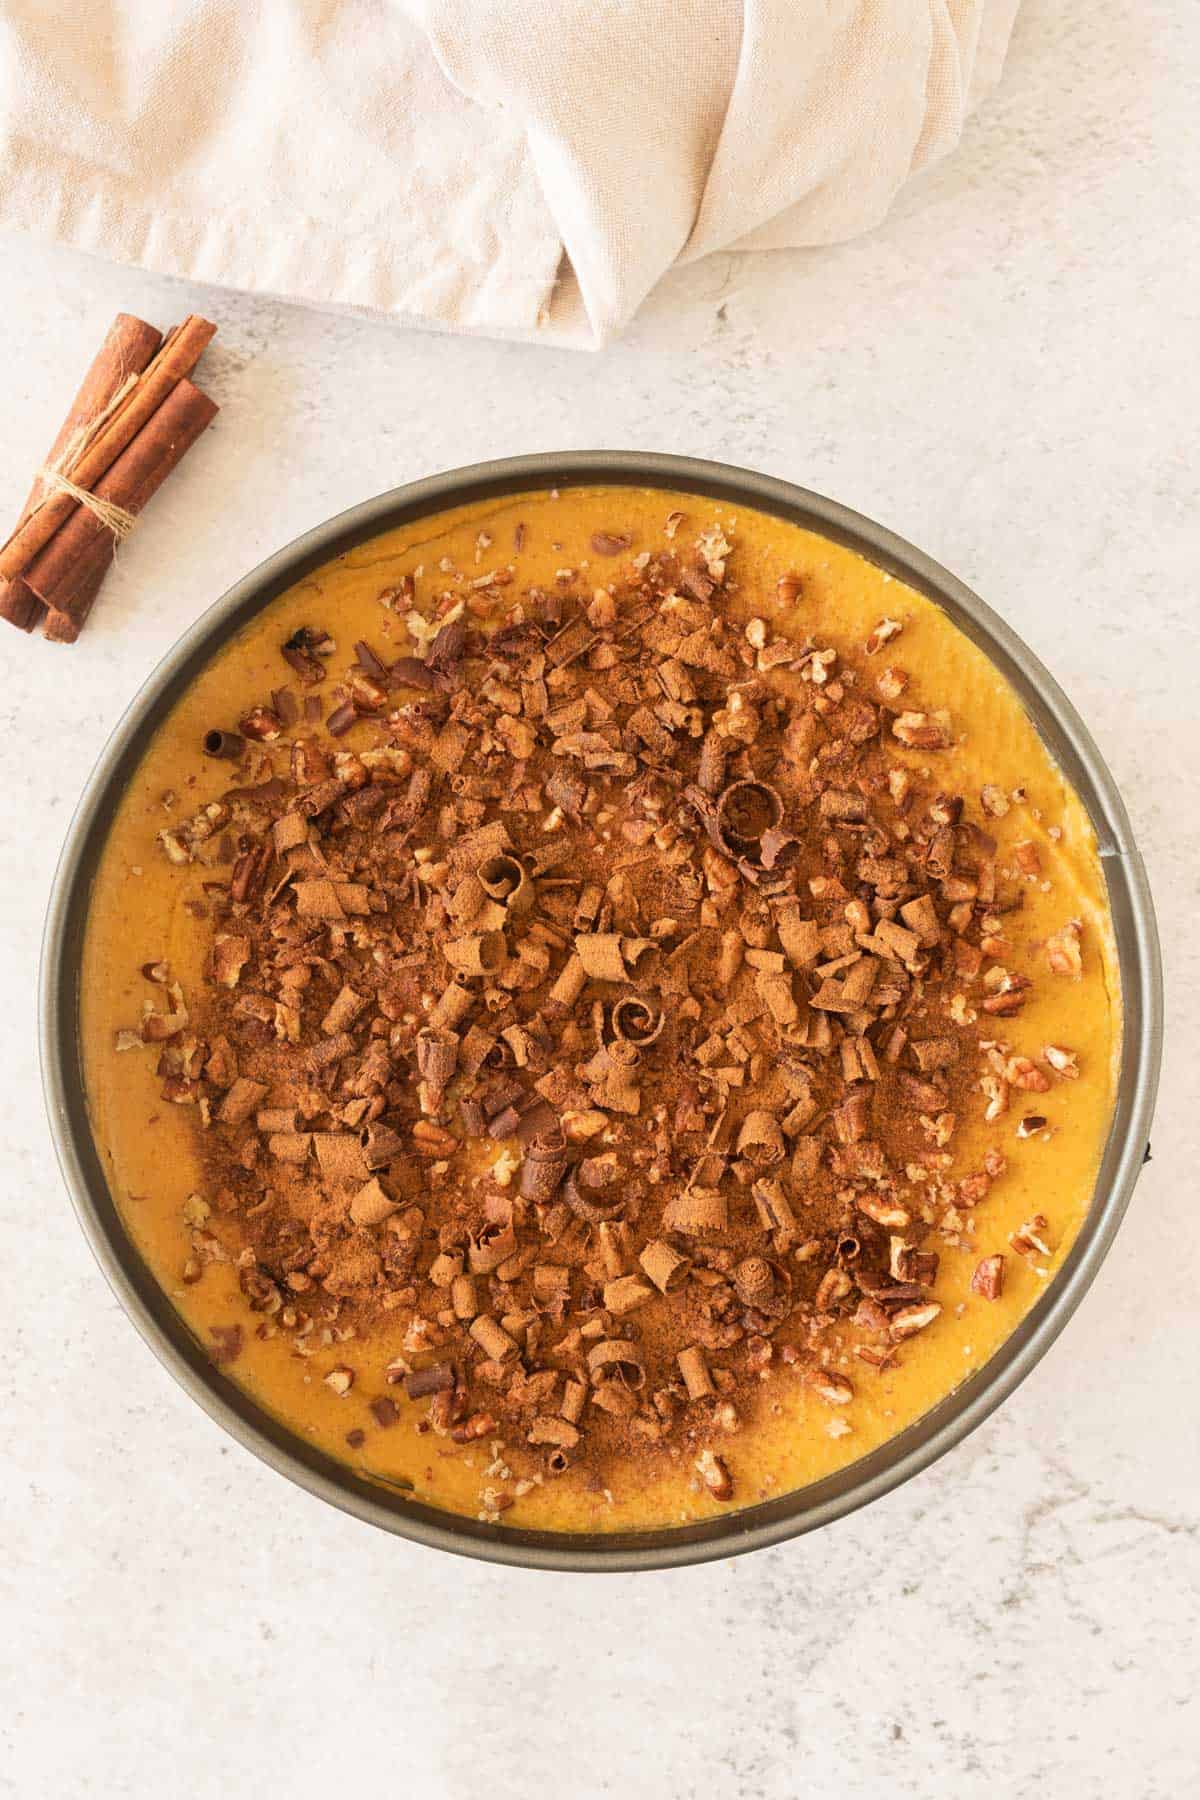 A pumpkin pie in a pan with cinnamon and nuts.